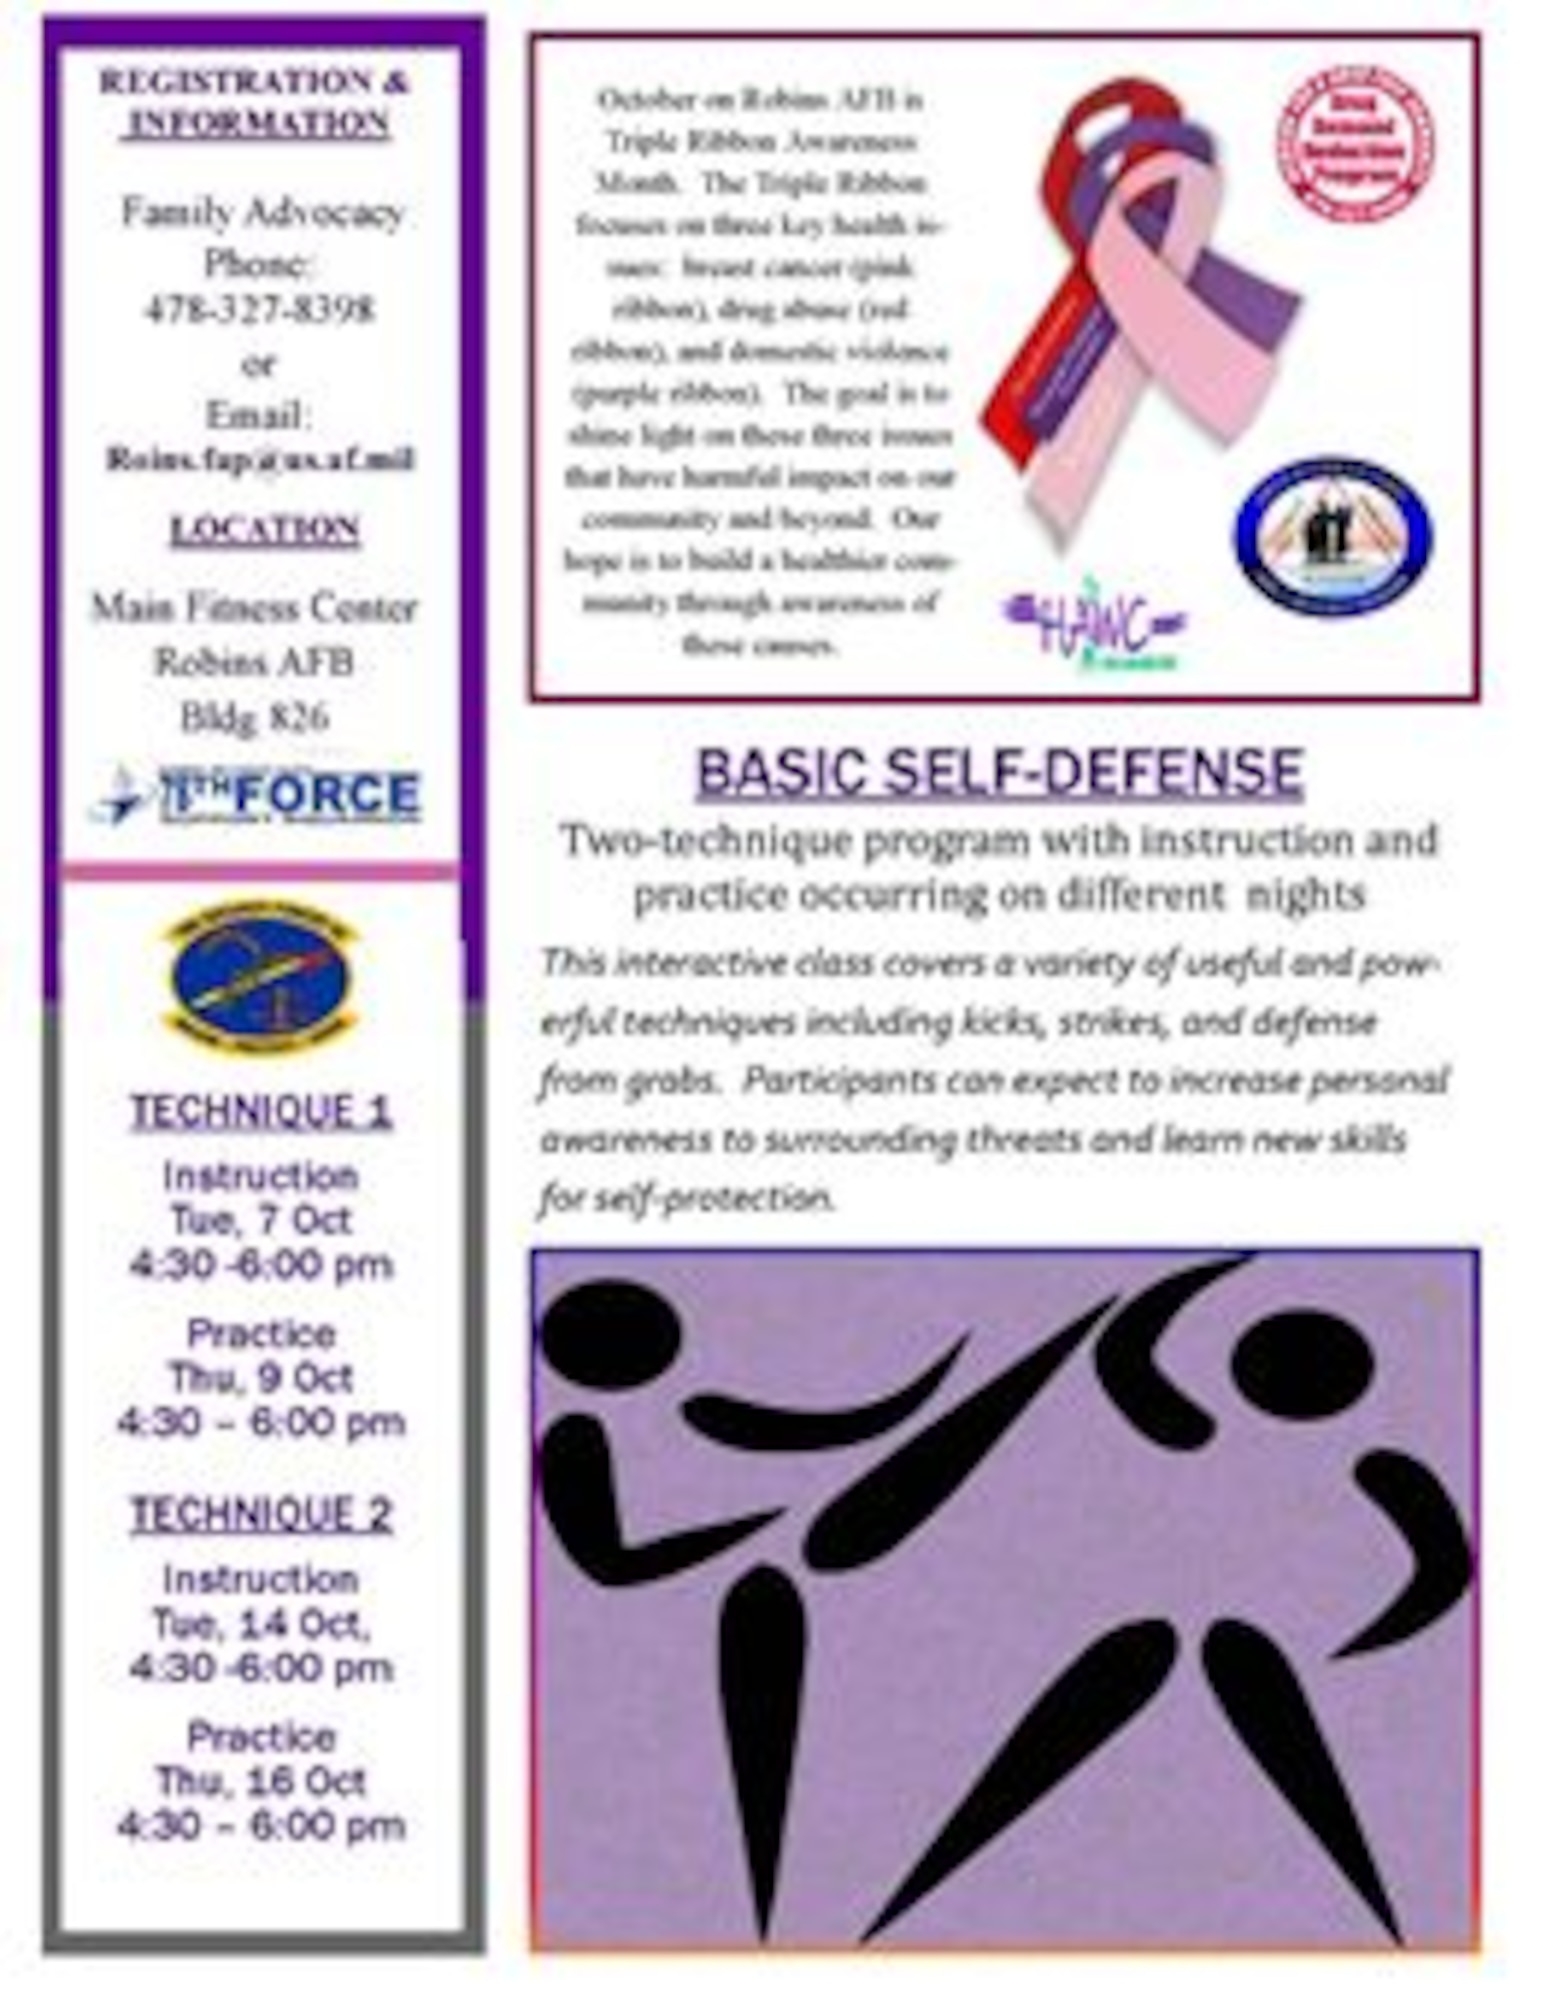 October 7, 9, 14, & 16, at the main fitness center, there will be a self-defense class available to anyone with base access from  4:30- 6:00 p.m.